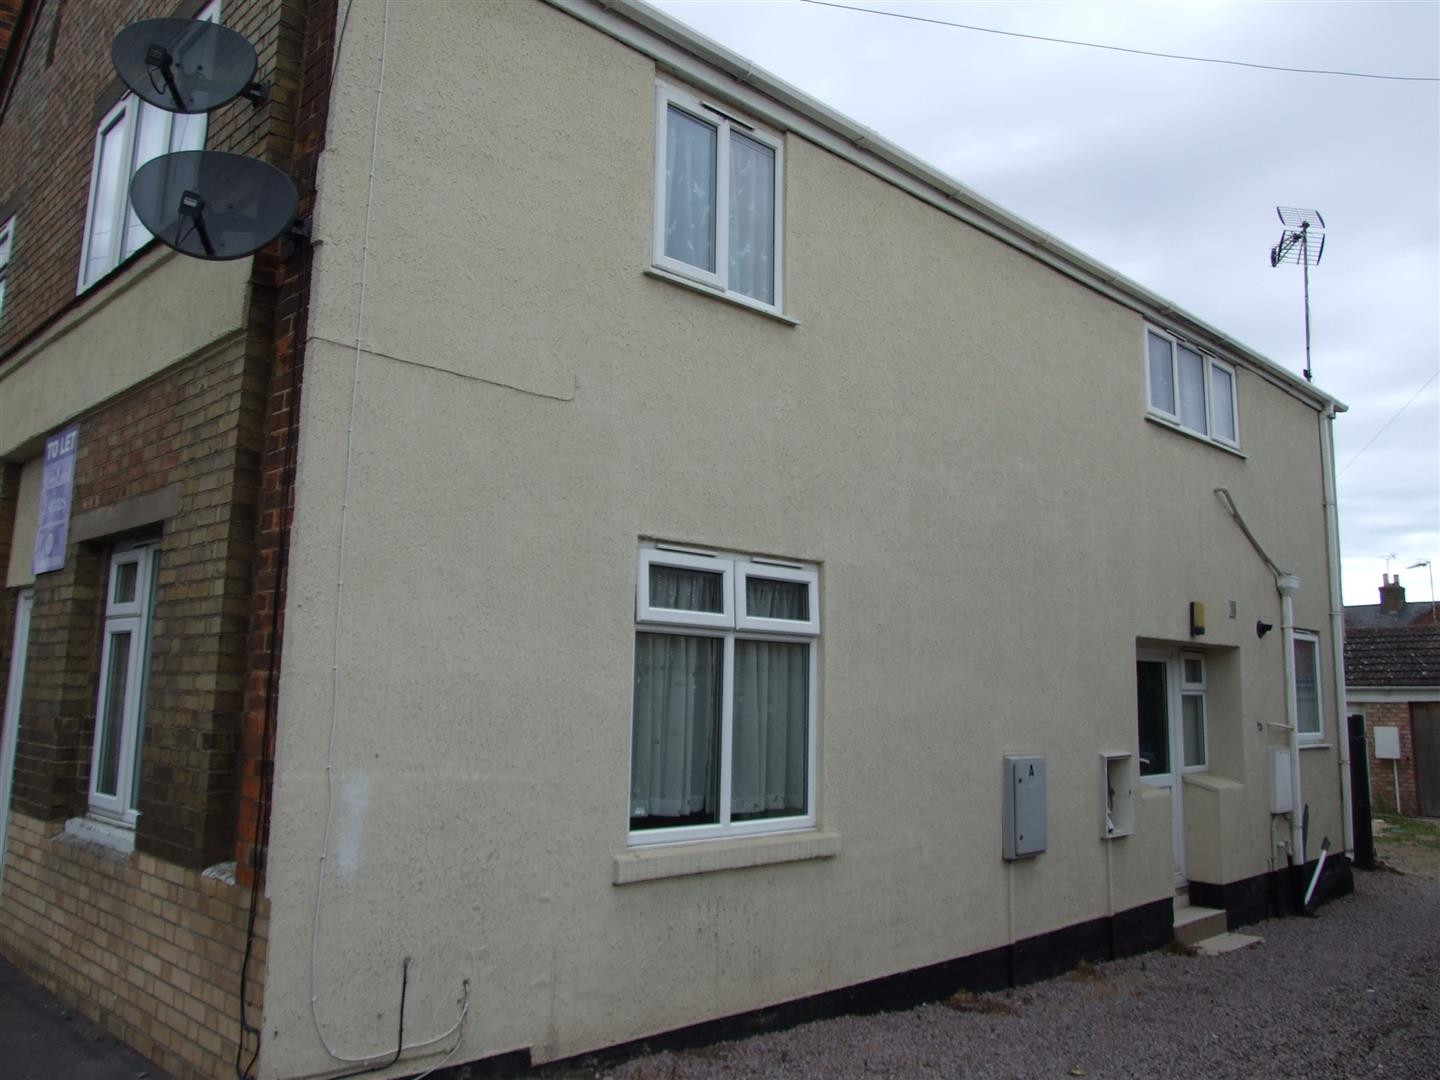 2 bed flat to rent - Property Image 1